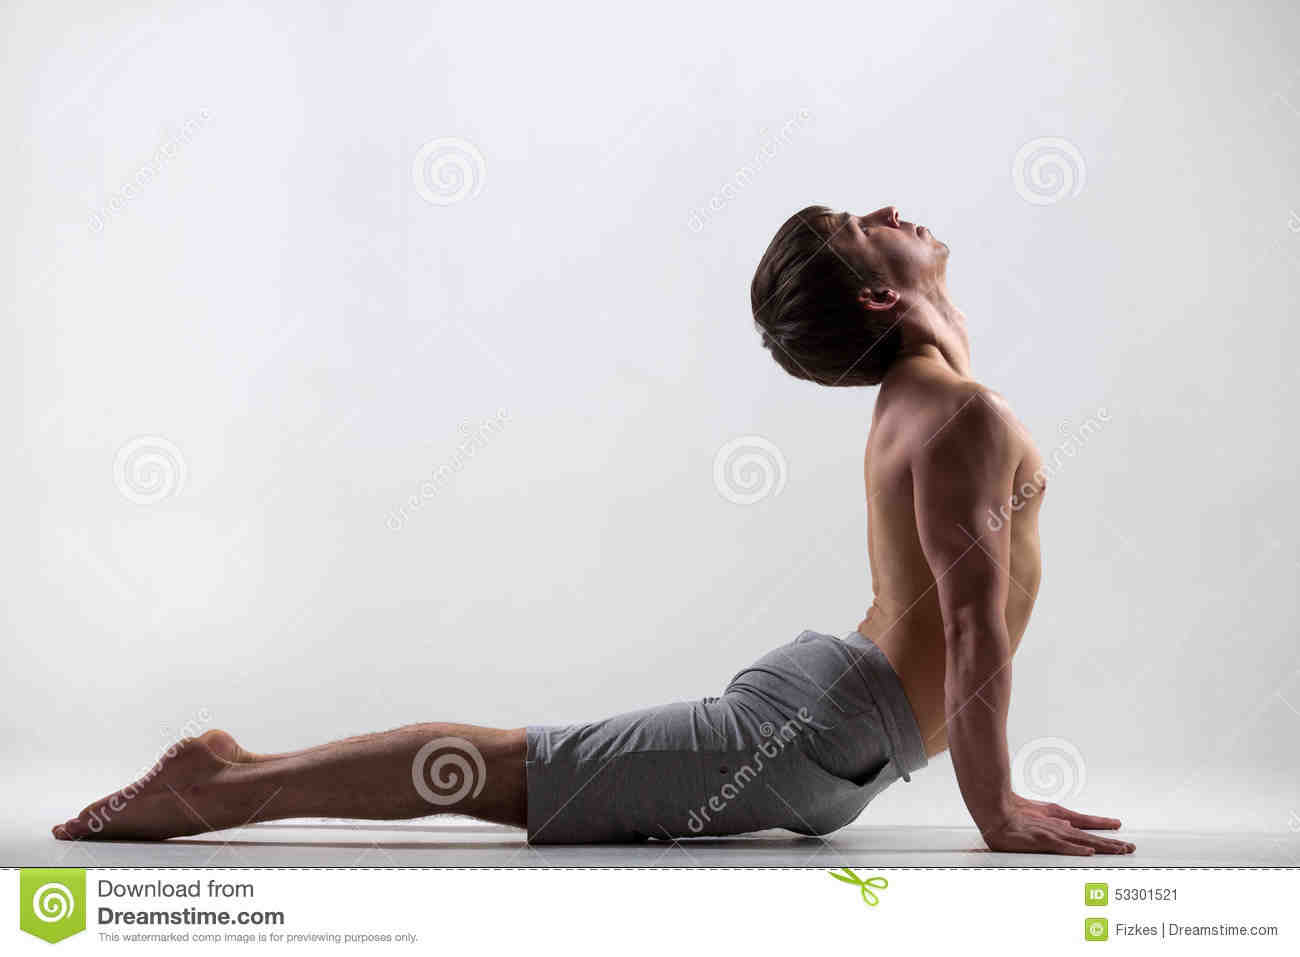 What is another name for upward facing dog pose?